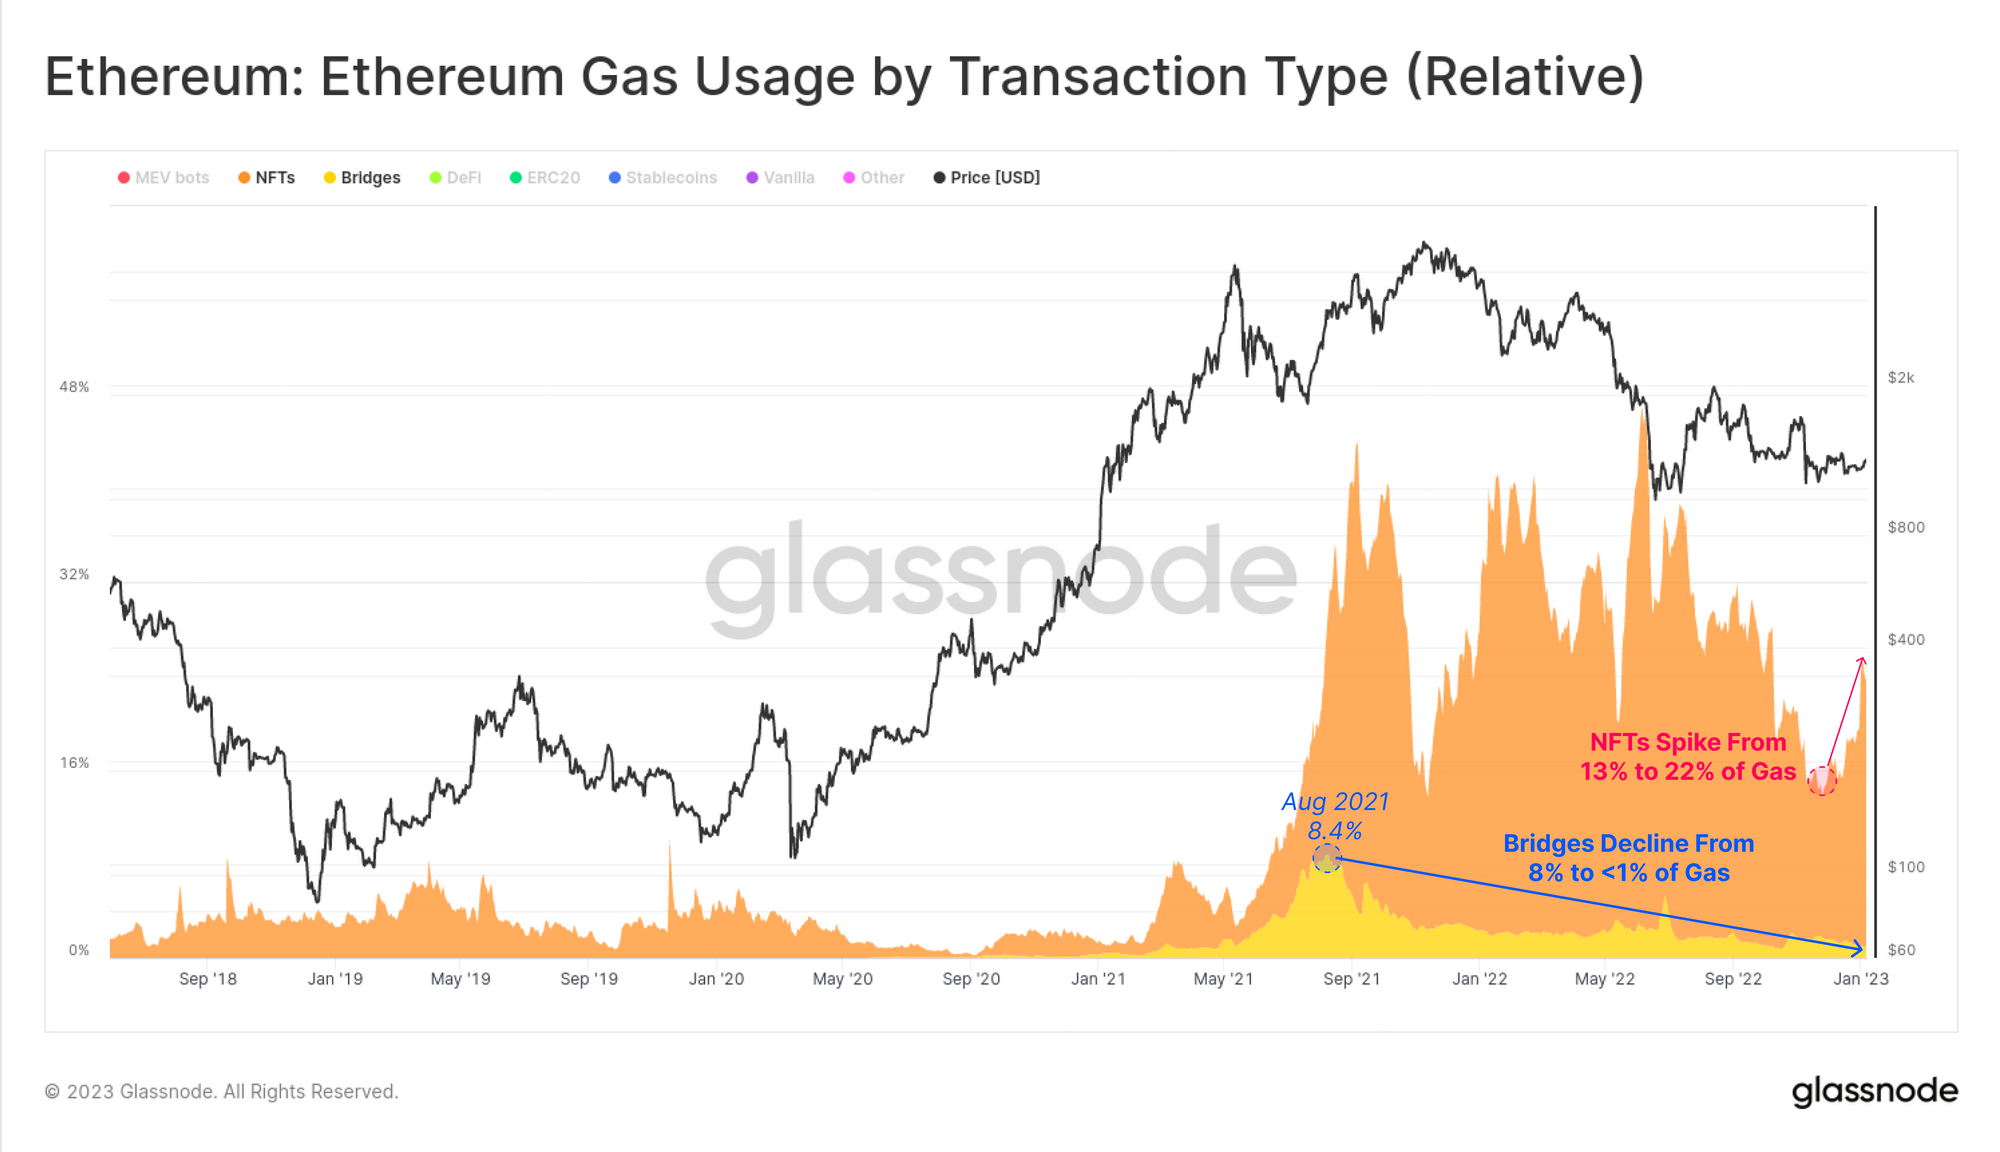 NFTs Make Comeback As Gas Dominance On Ethereum Rebounds To 22%